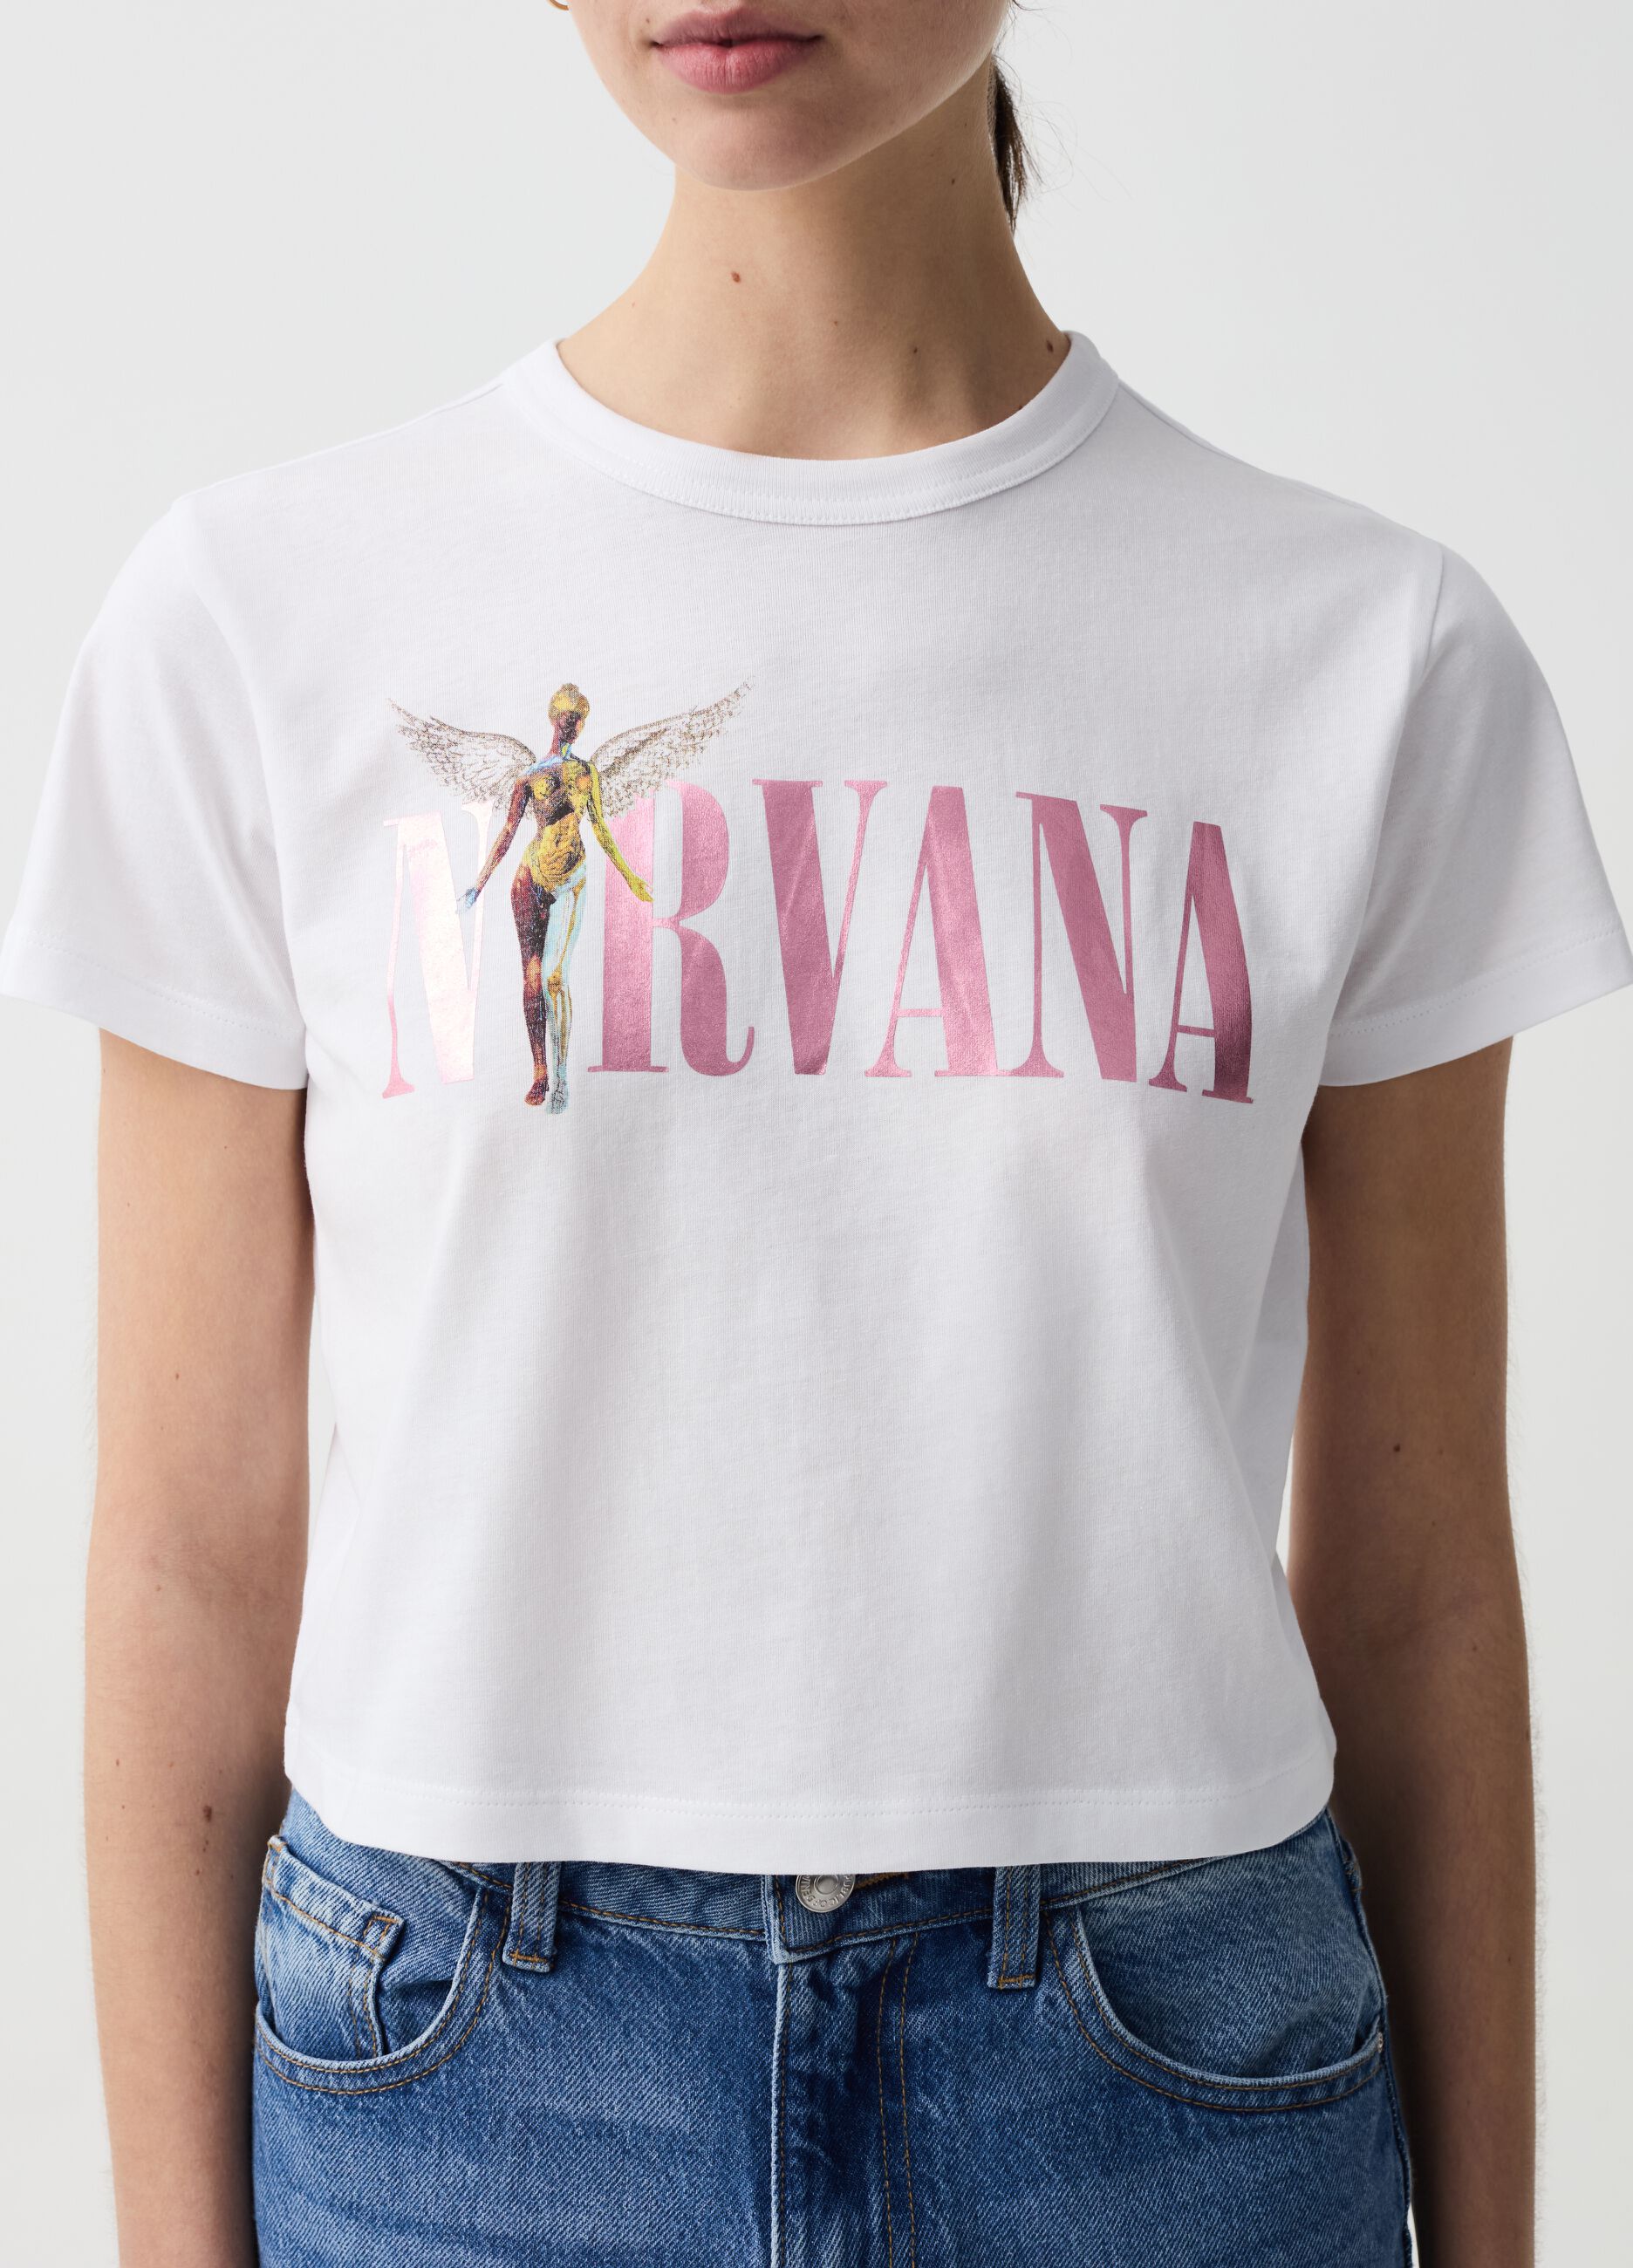 T-shirt con stampa Nirvana in foil